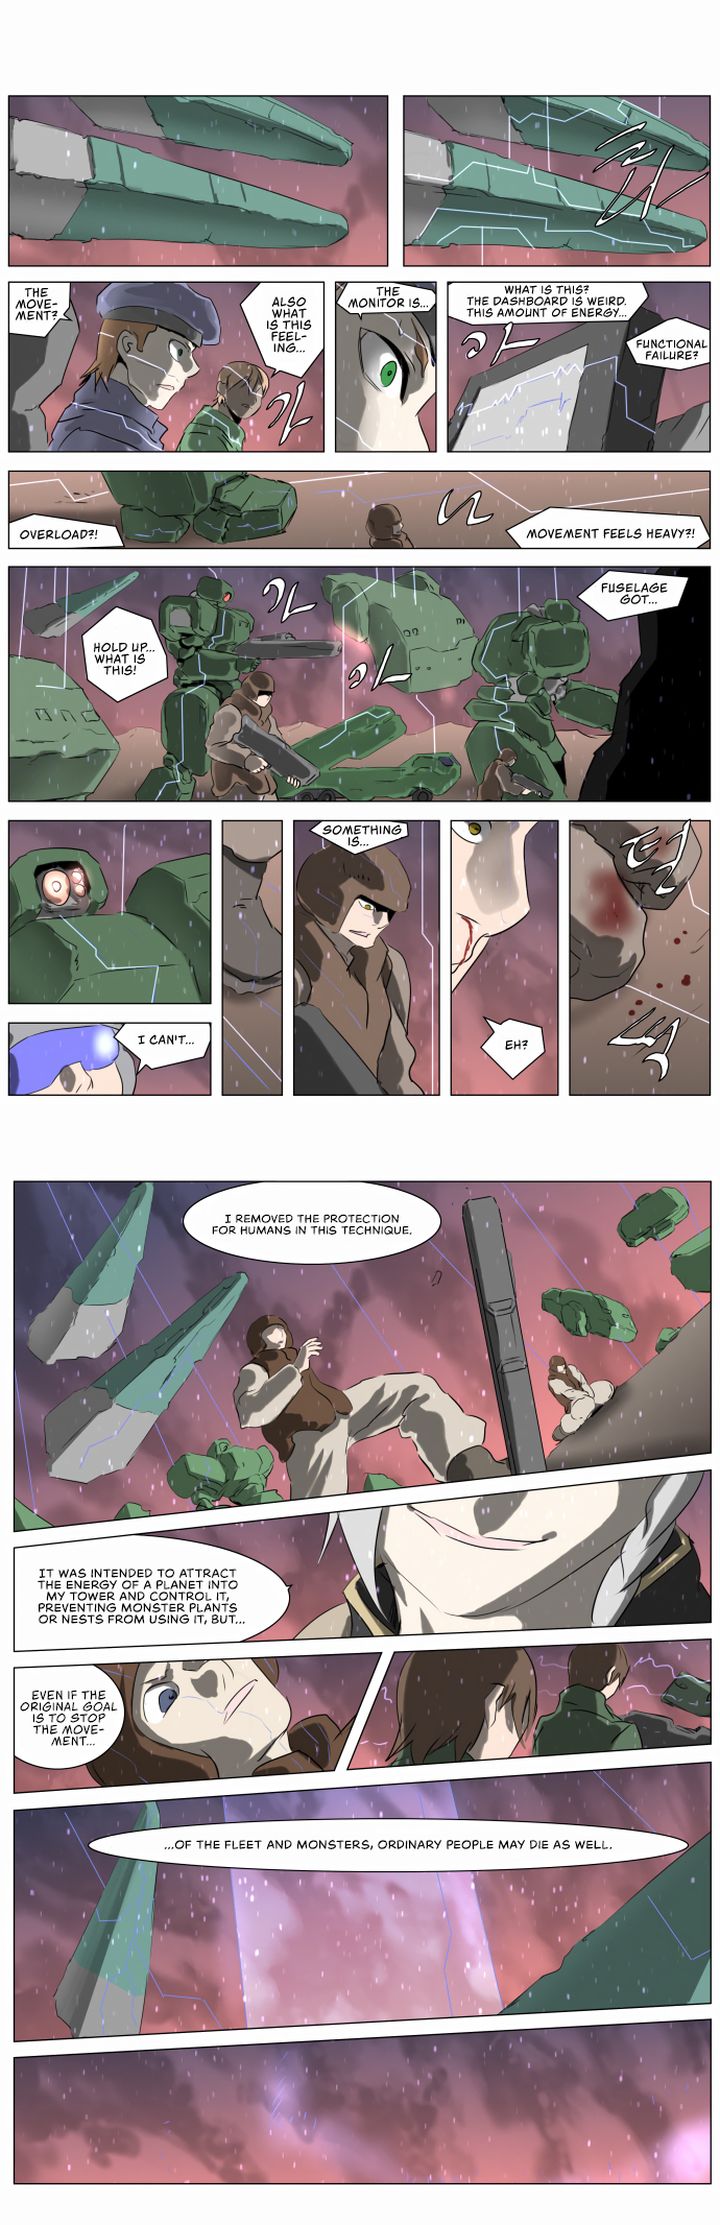 Knight Run Chapter 228 Page 9